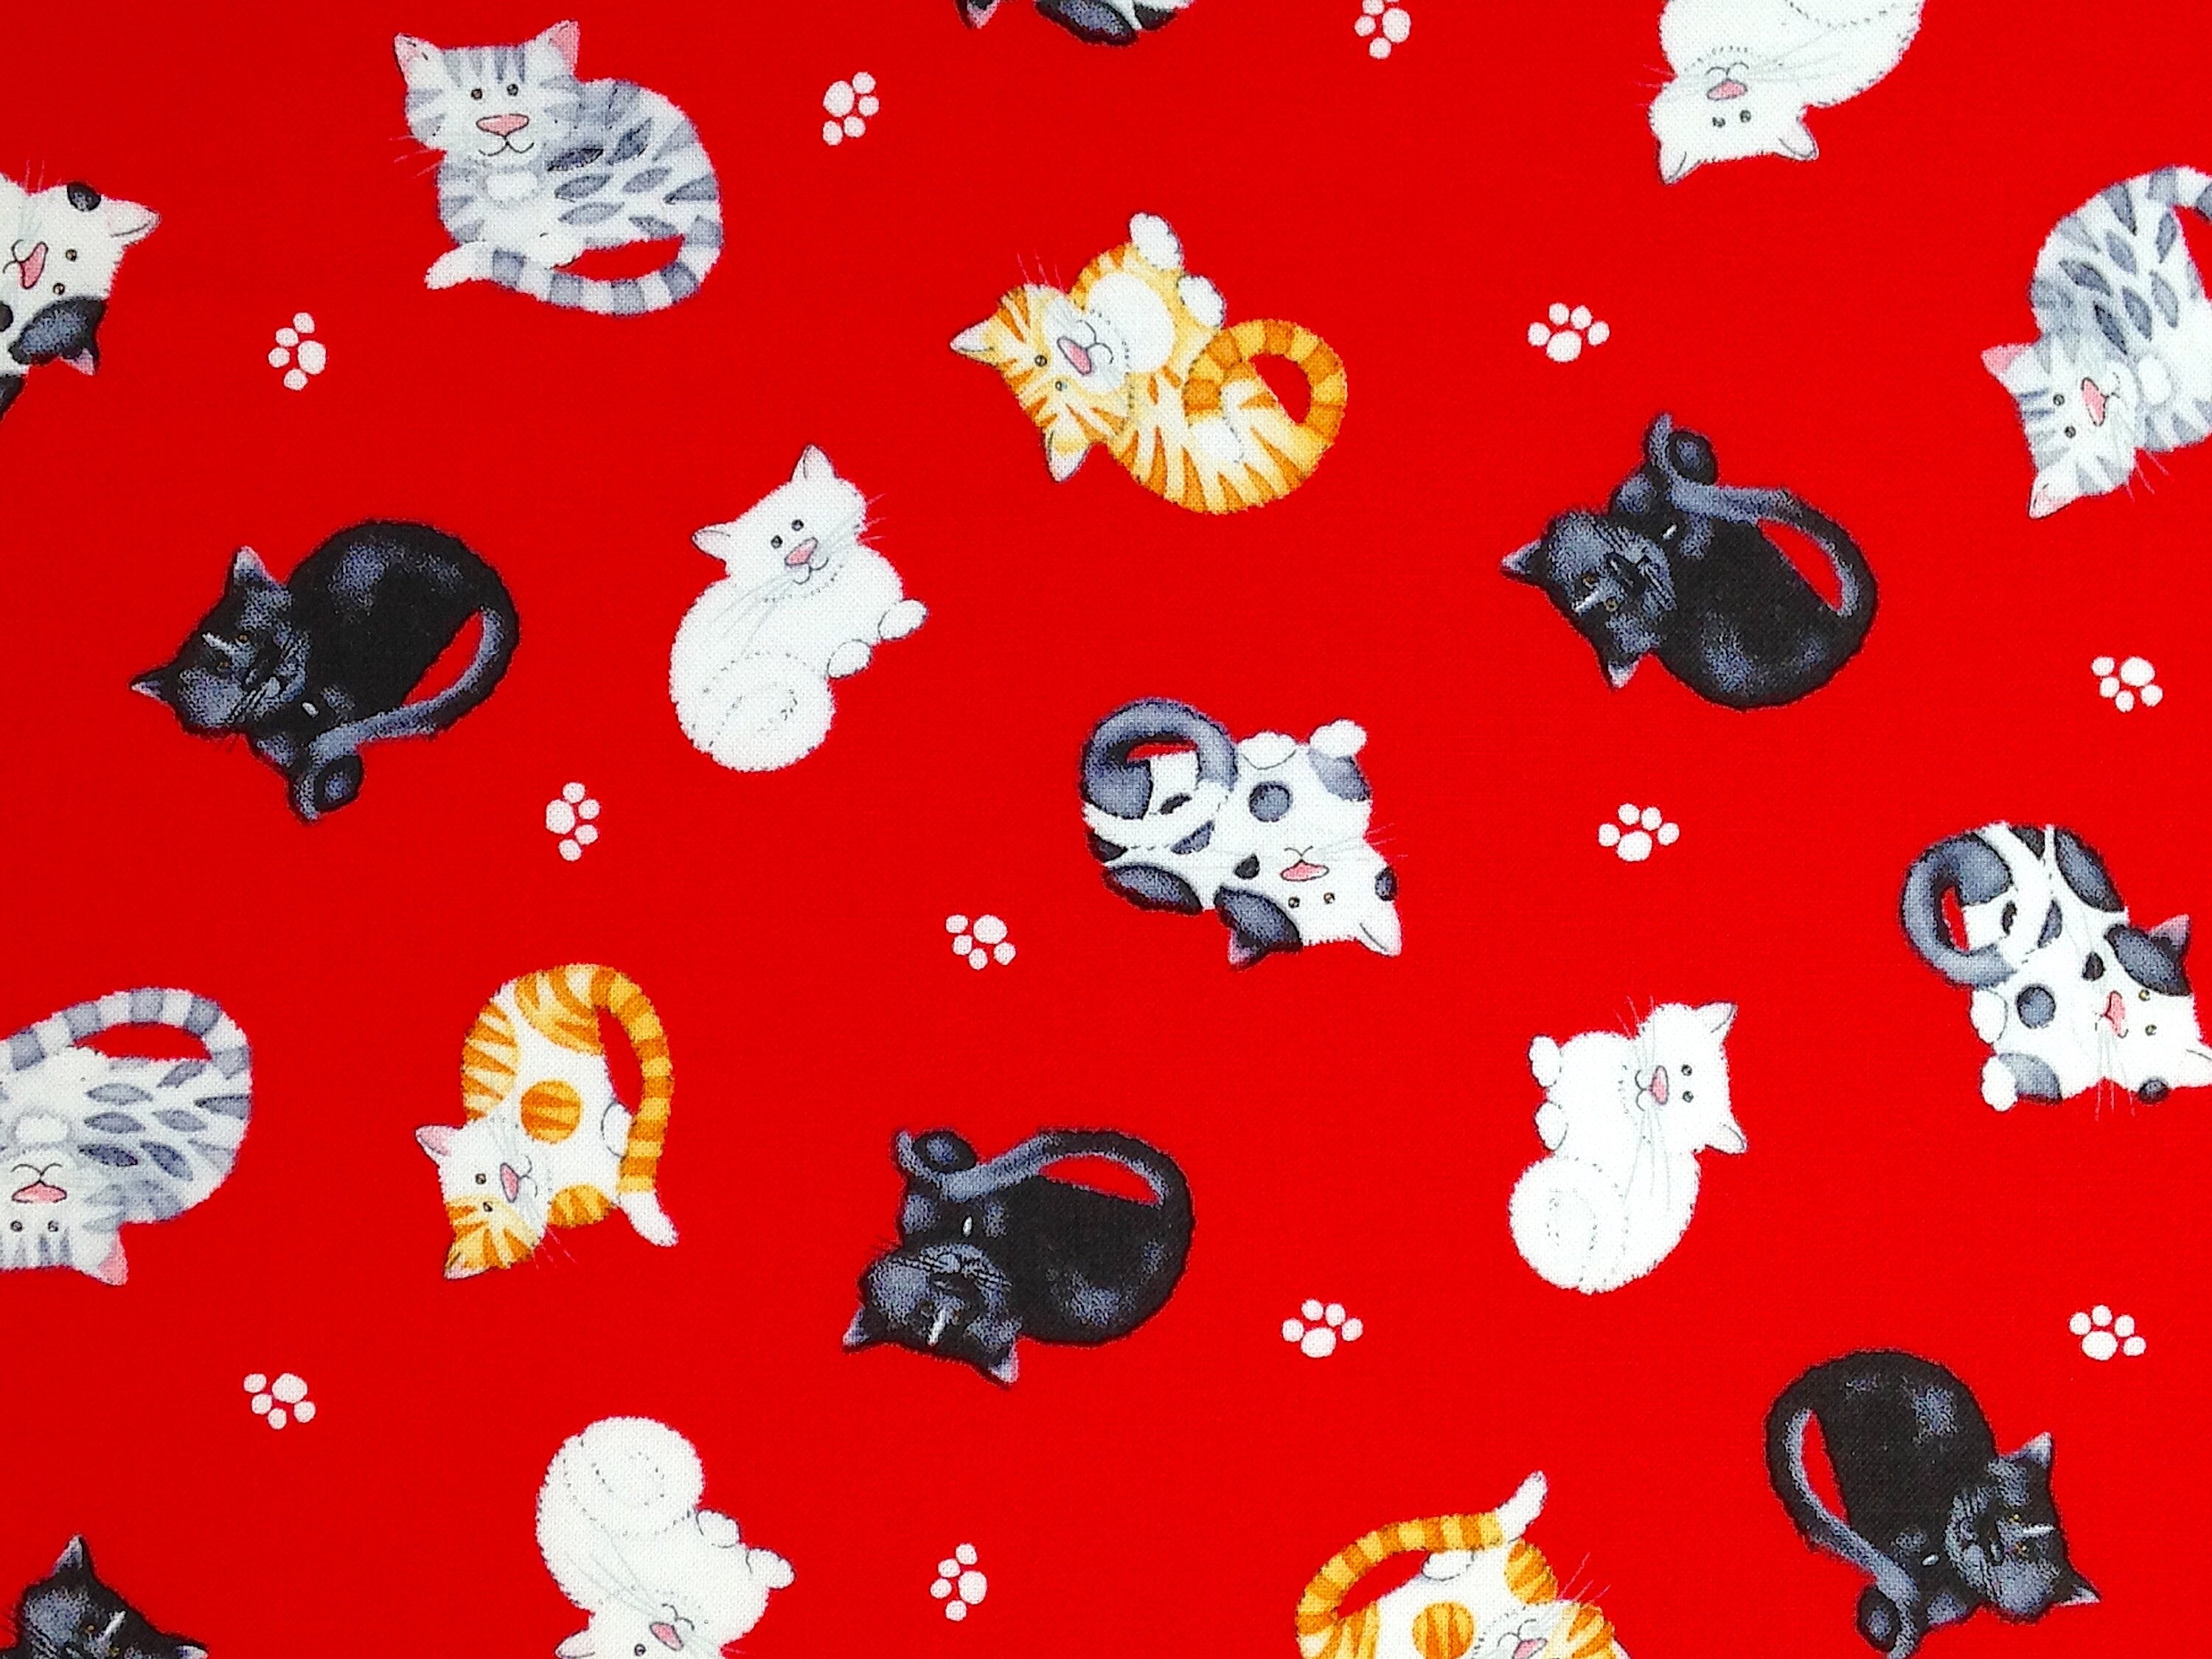 Cats and paw prints scattered on a red background. The cats are arranged in a random fashion on the fabric.